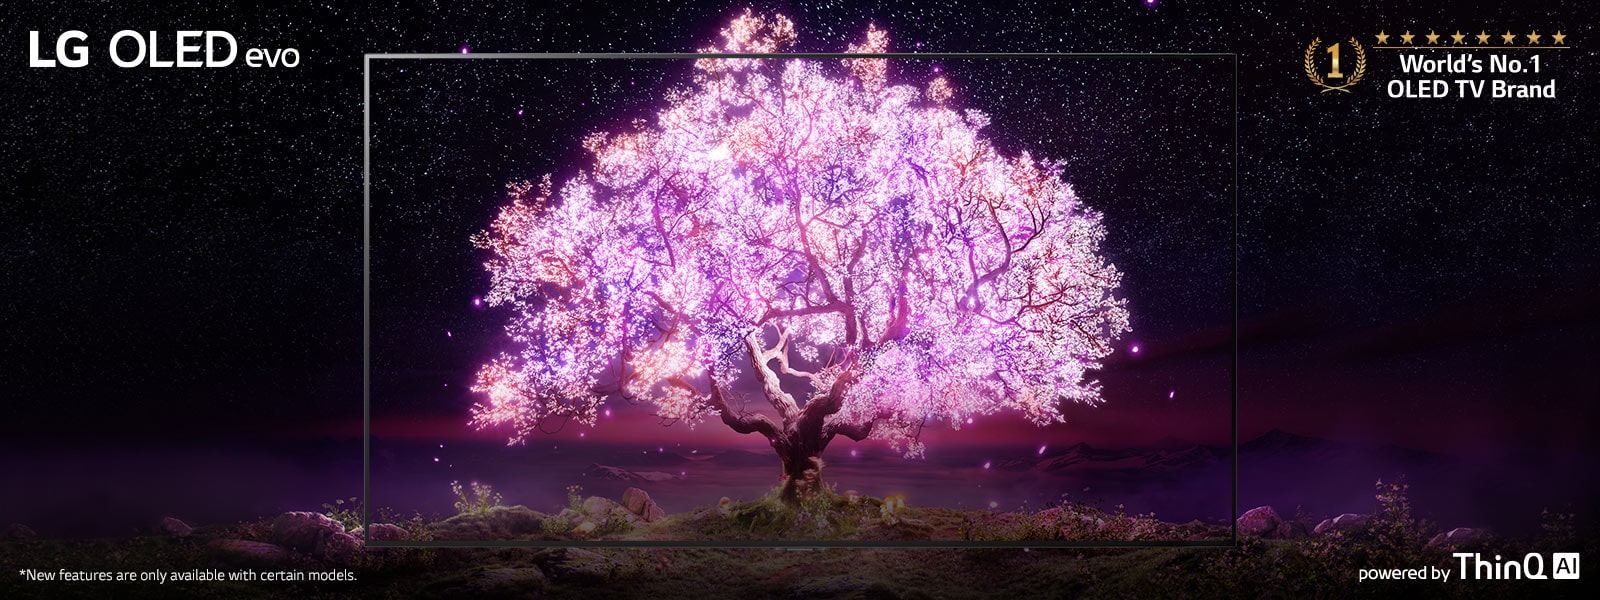 The scene where the OLED TV frame is overlapped with the image showing a tree shining in pink. The'World's No.1 OLED TV Brand' logo was placed on the upper right. The 'powered by ThinQ AI' logo was placed at the bottom right. 'LG OLED evo' logo was placed on the upper left corner